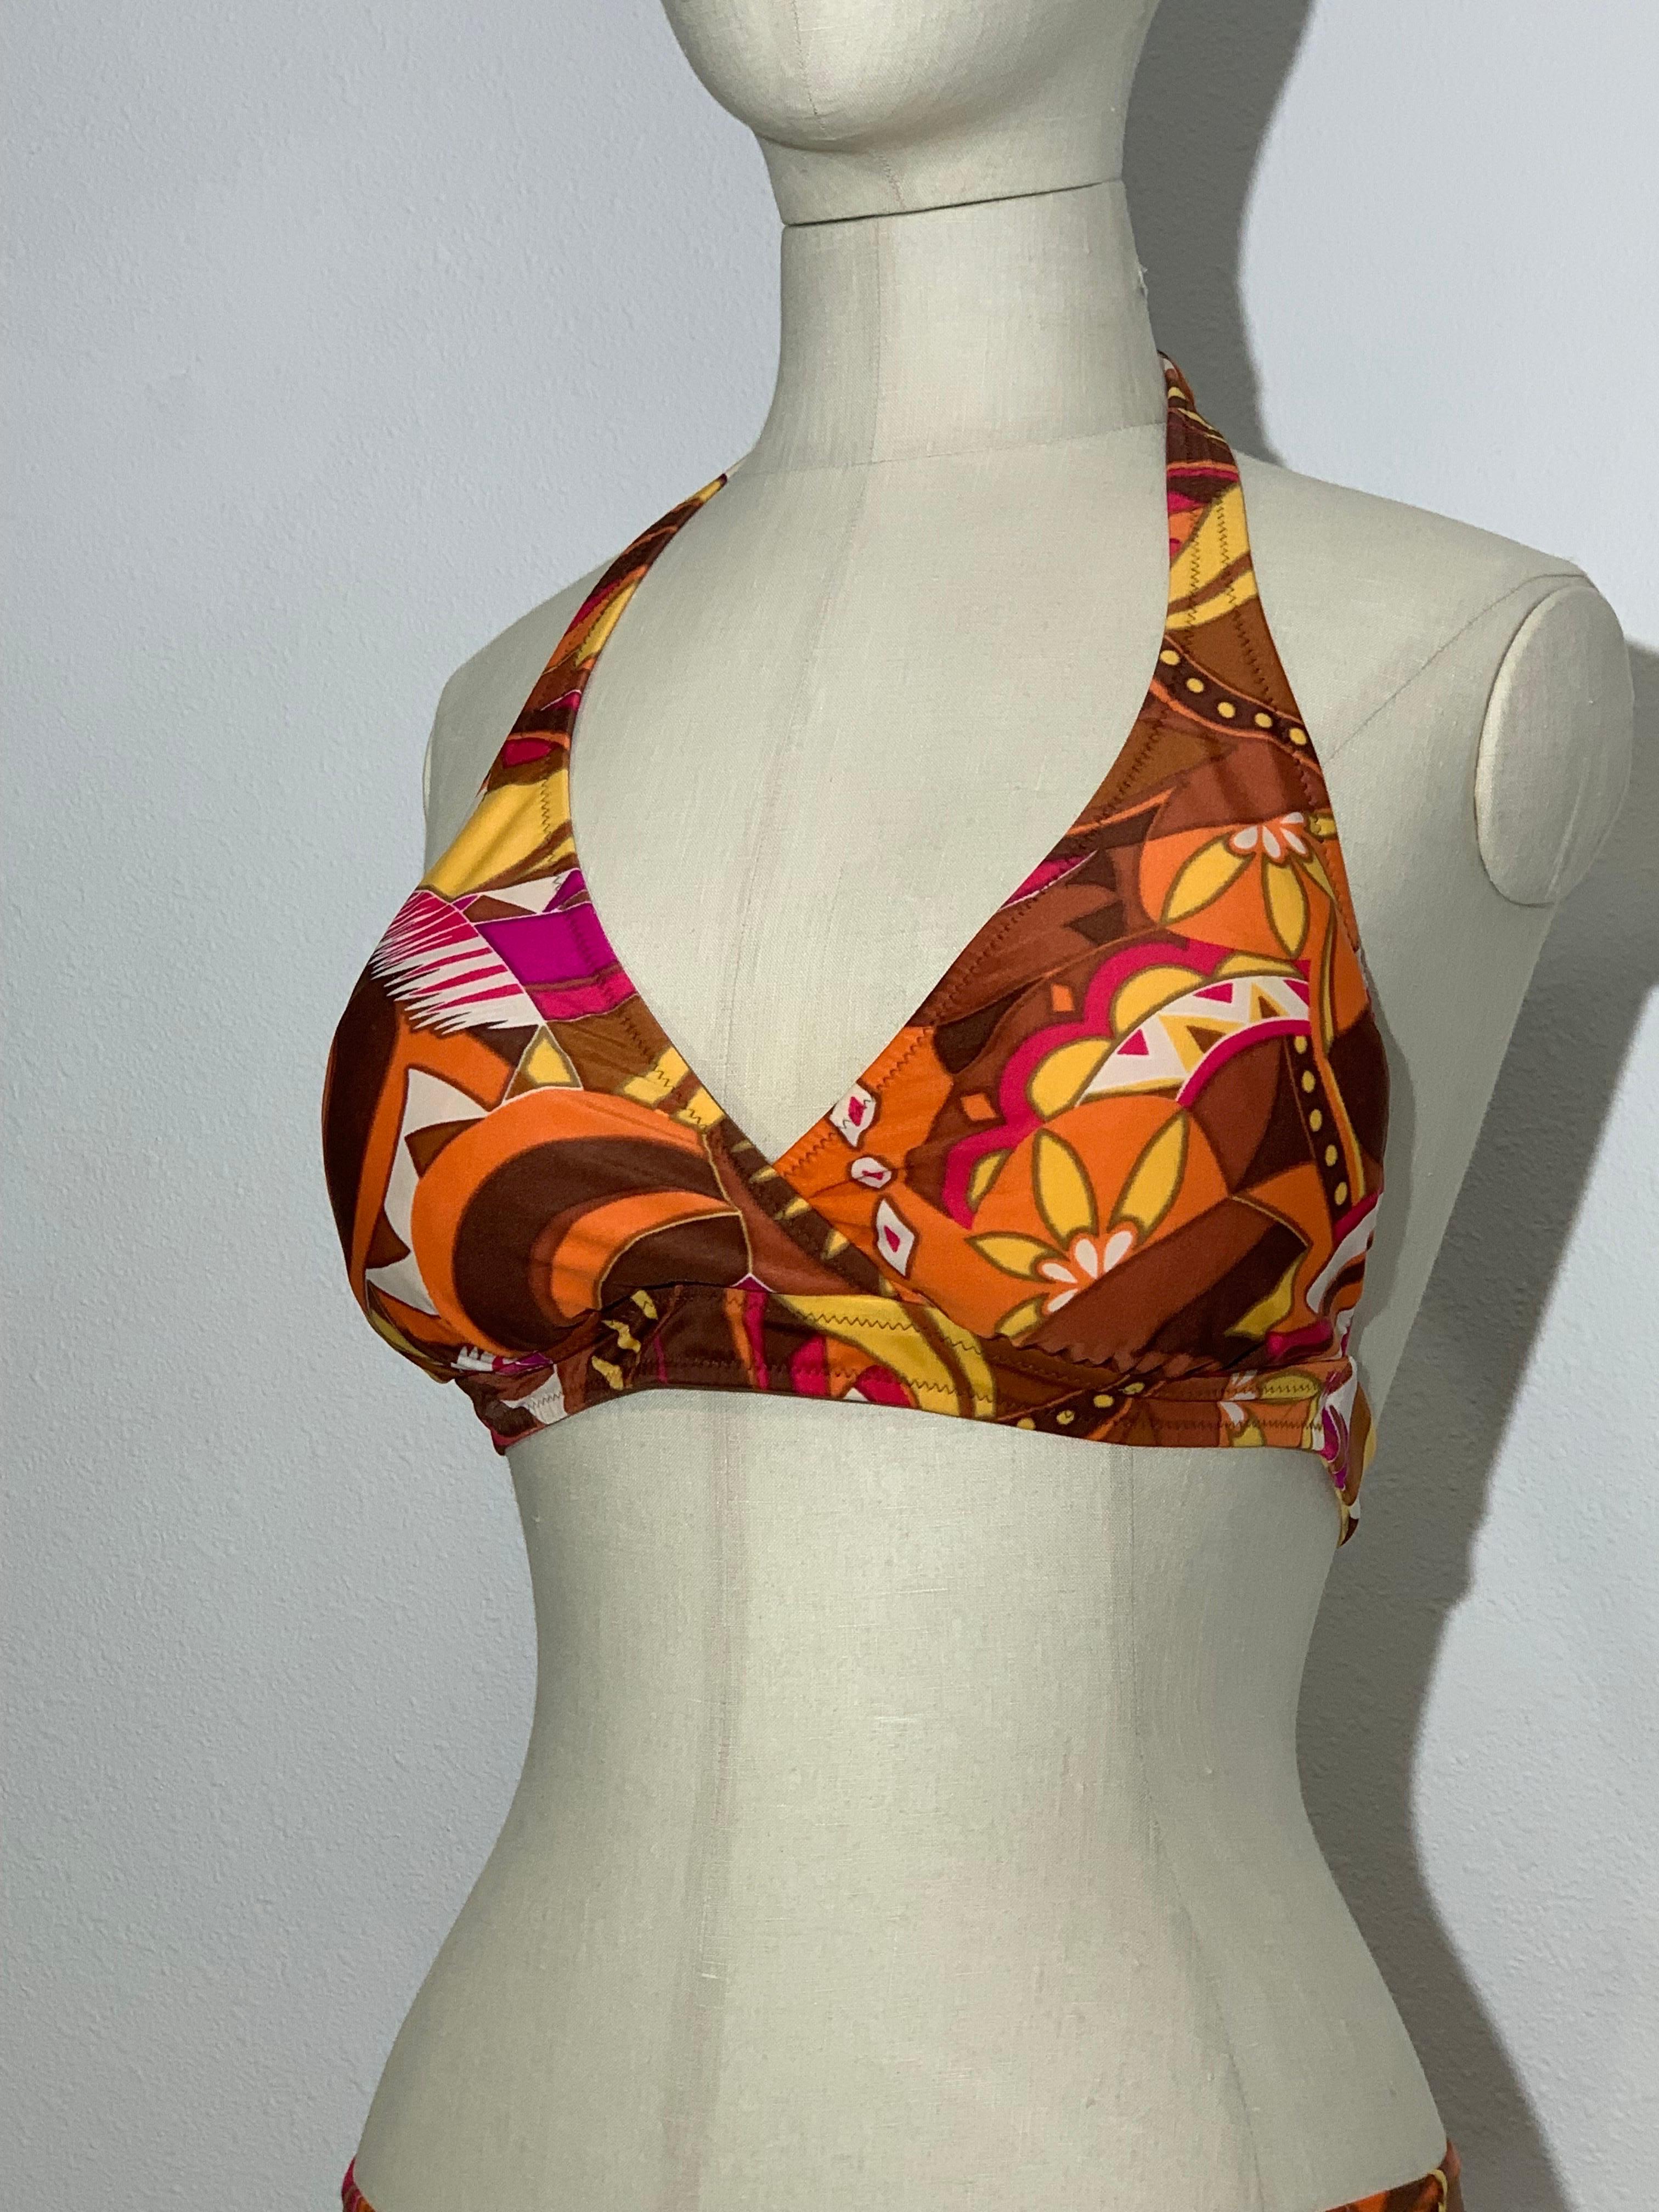 1970s Gottex Stylized Floral 2-Piece Bikini Swimsuit in Brown Copper and Orange In Excellent Condition For Sale In Gresham, OR